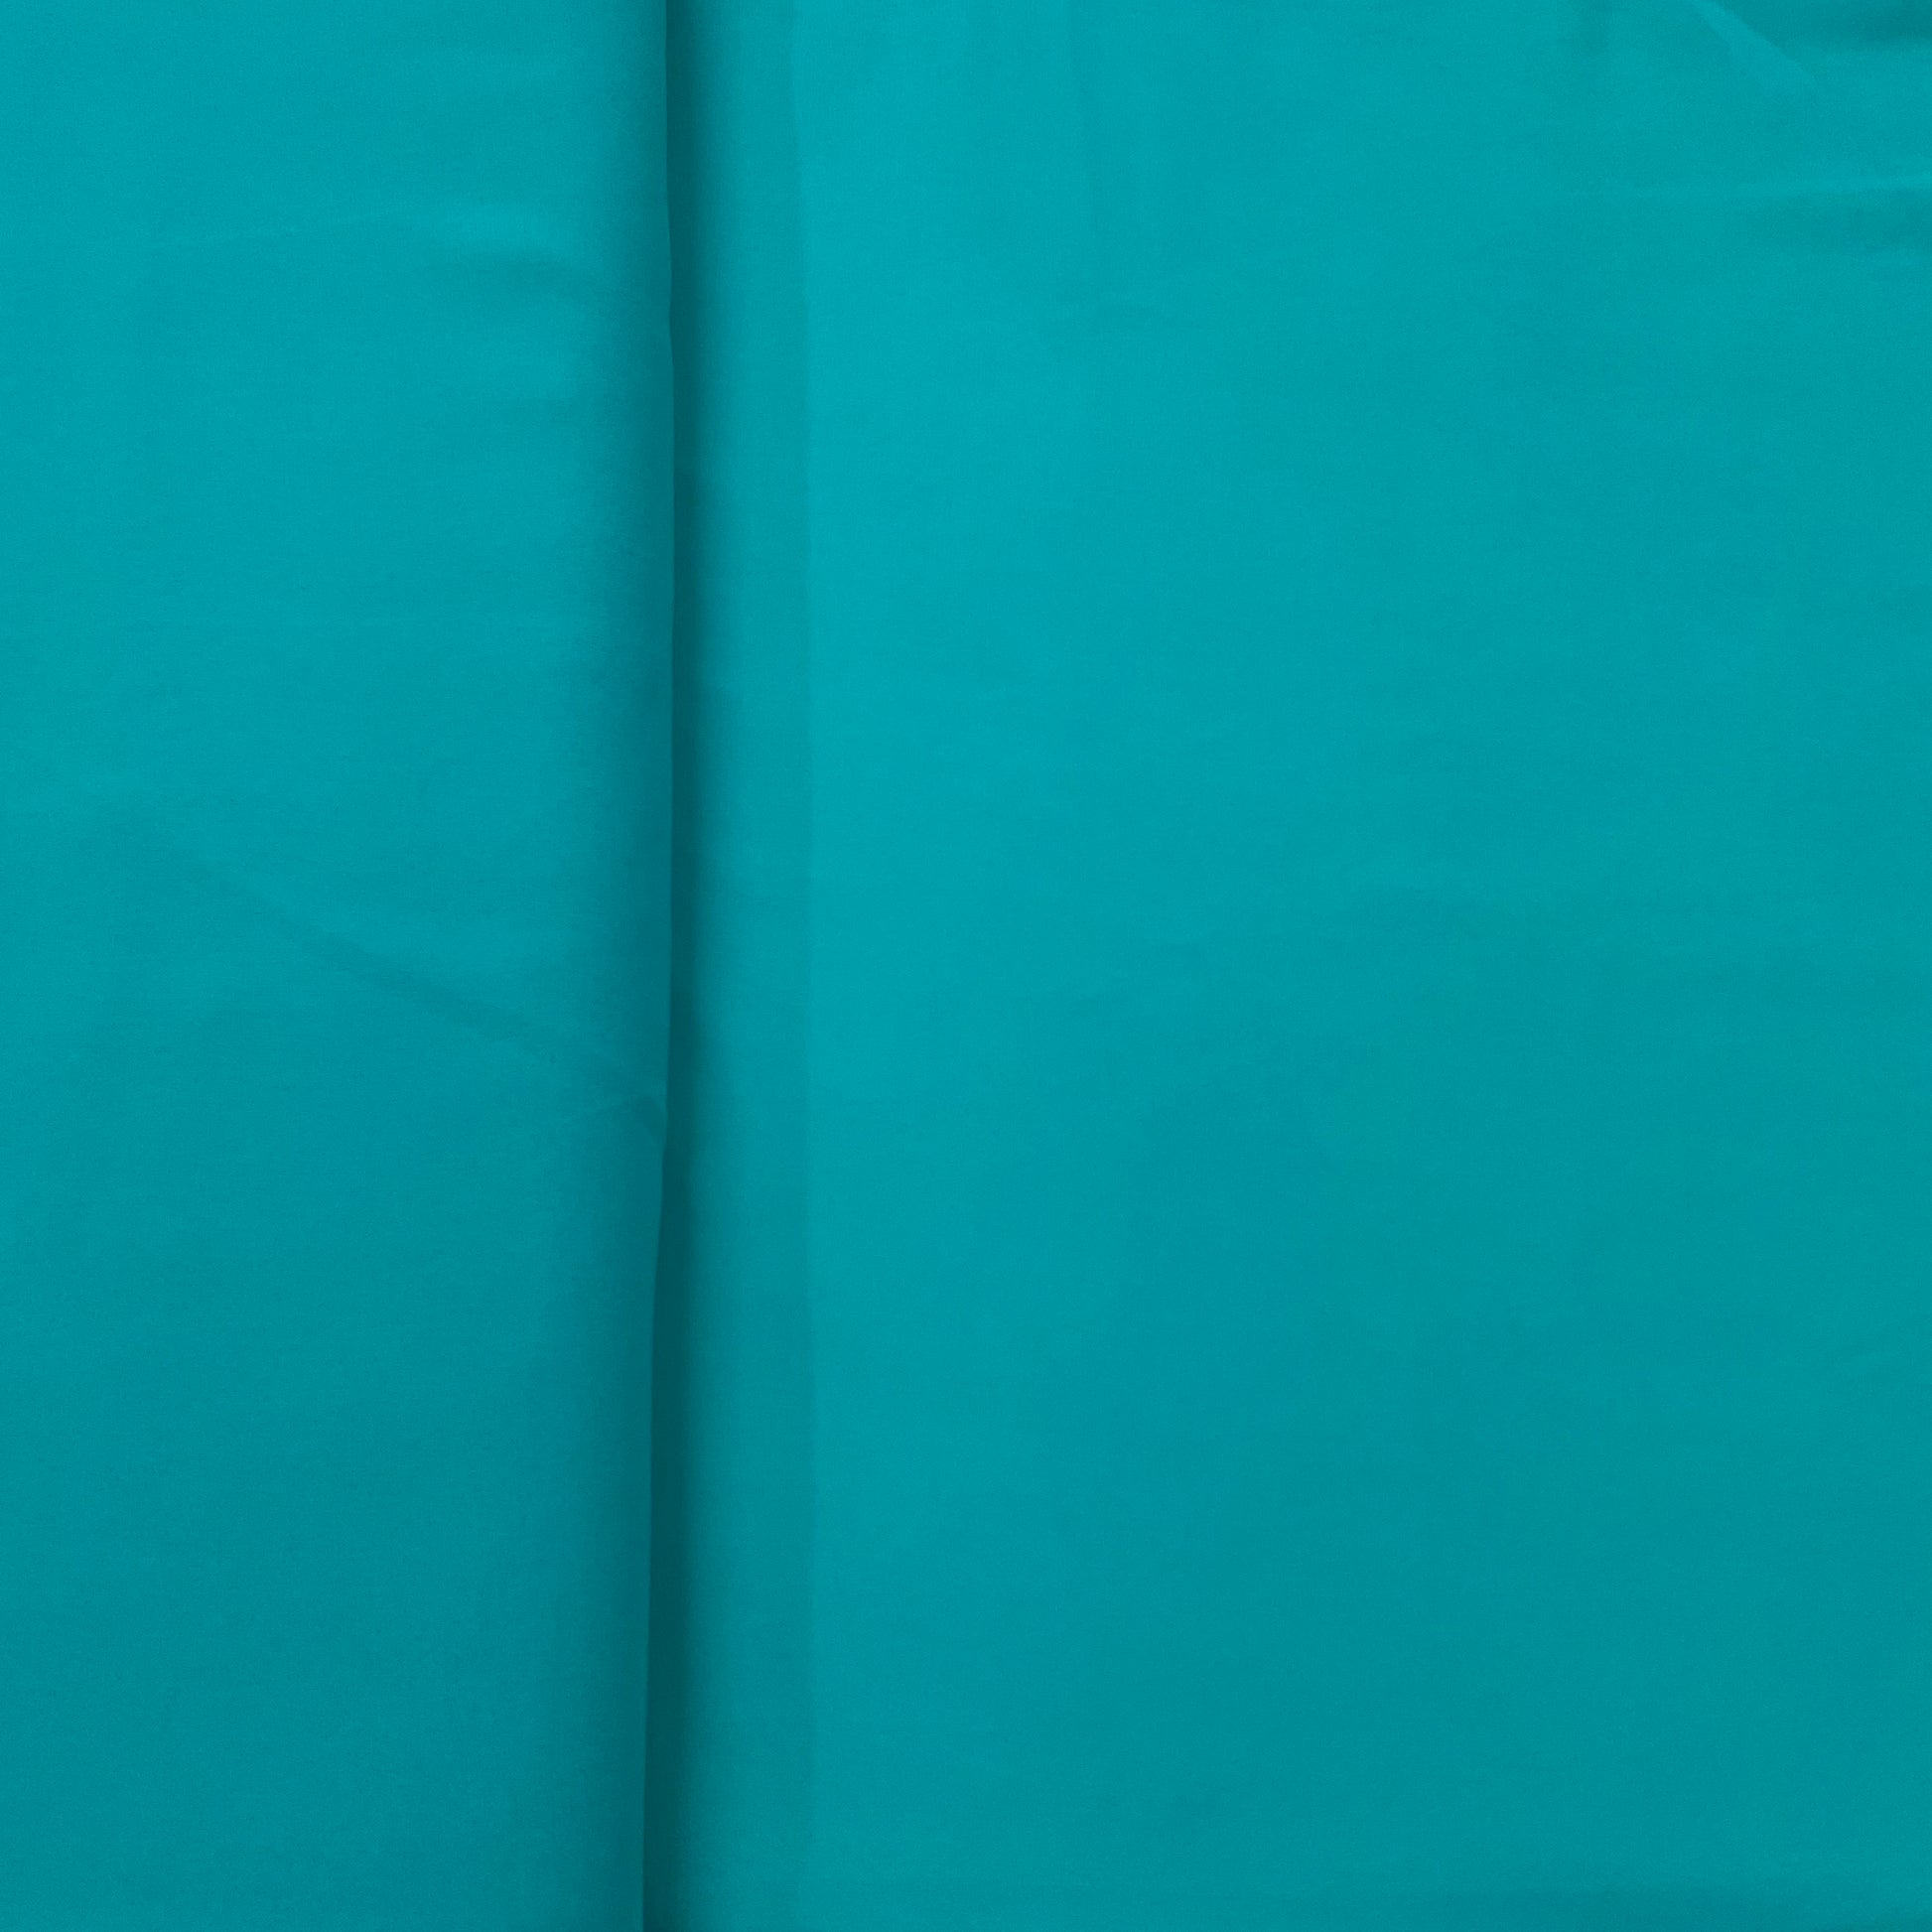 Turquoise Blue Solid Georgette Fabric - TradeUNO